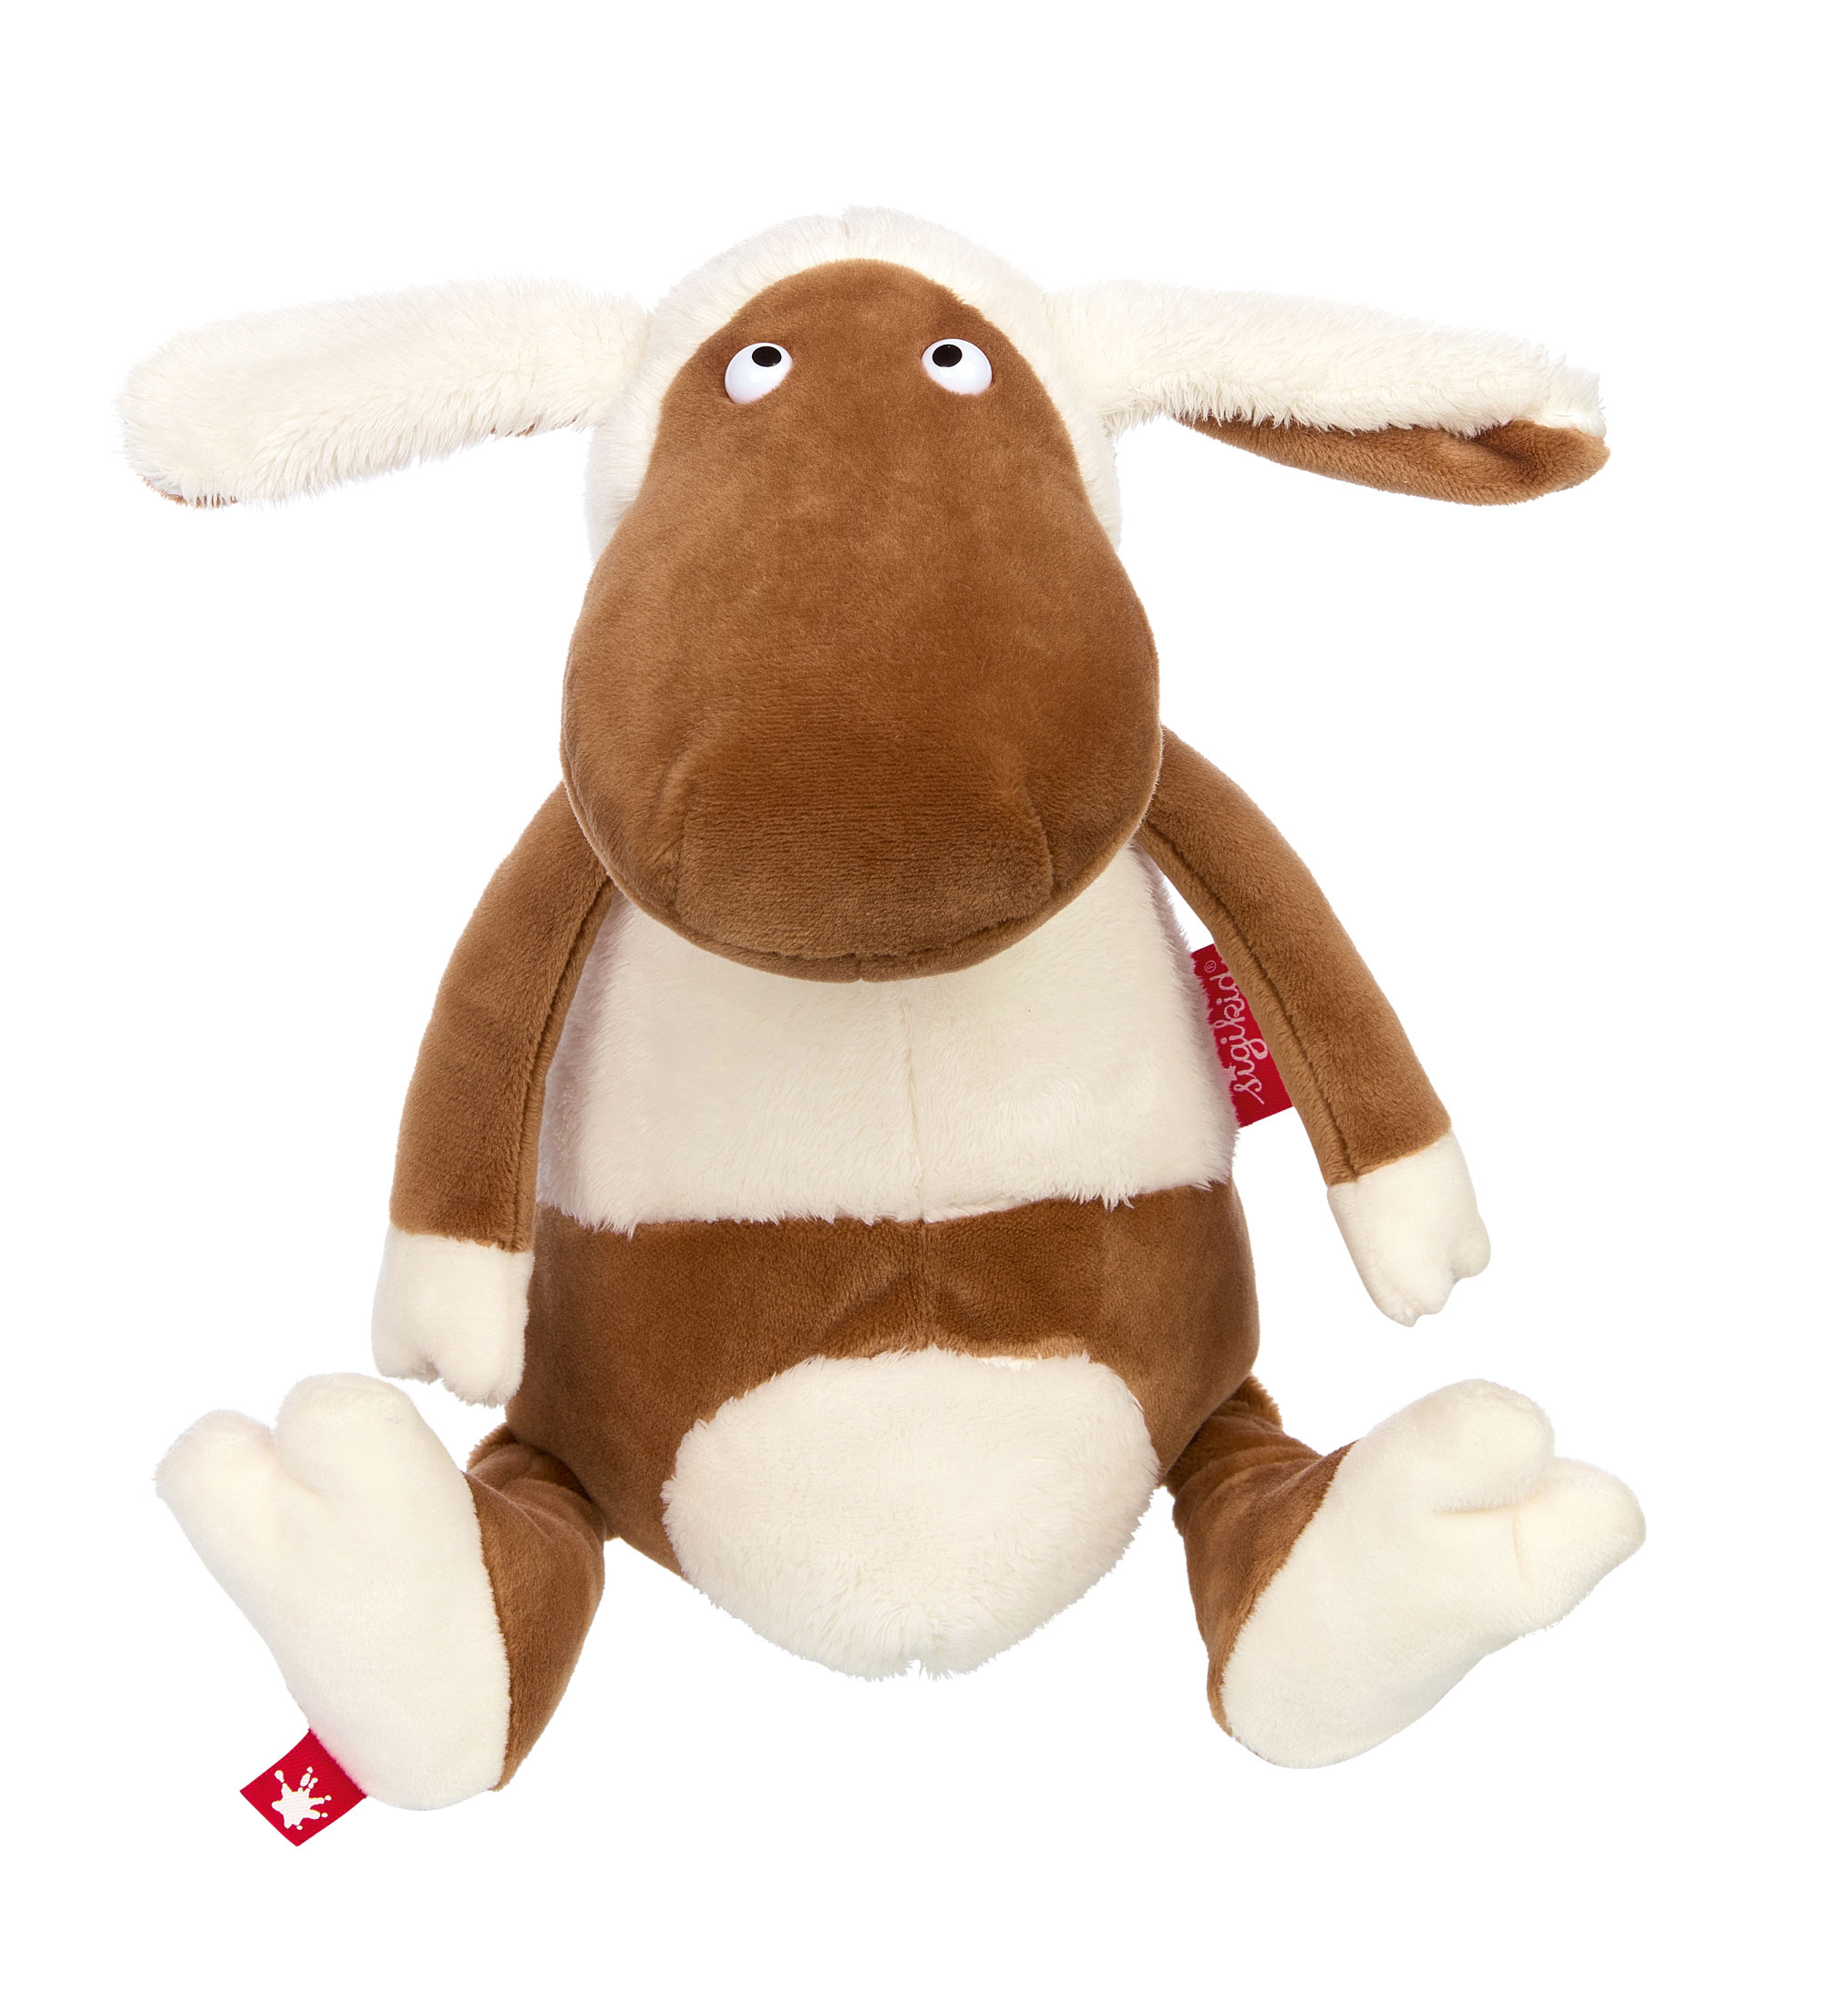 Soft toy sheep Dotte Dot, Country Crunchy